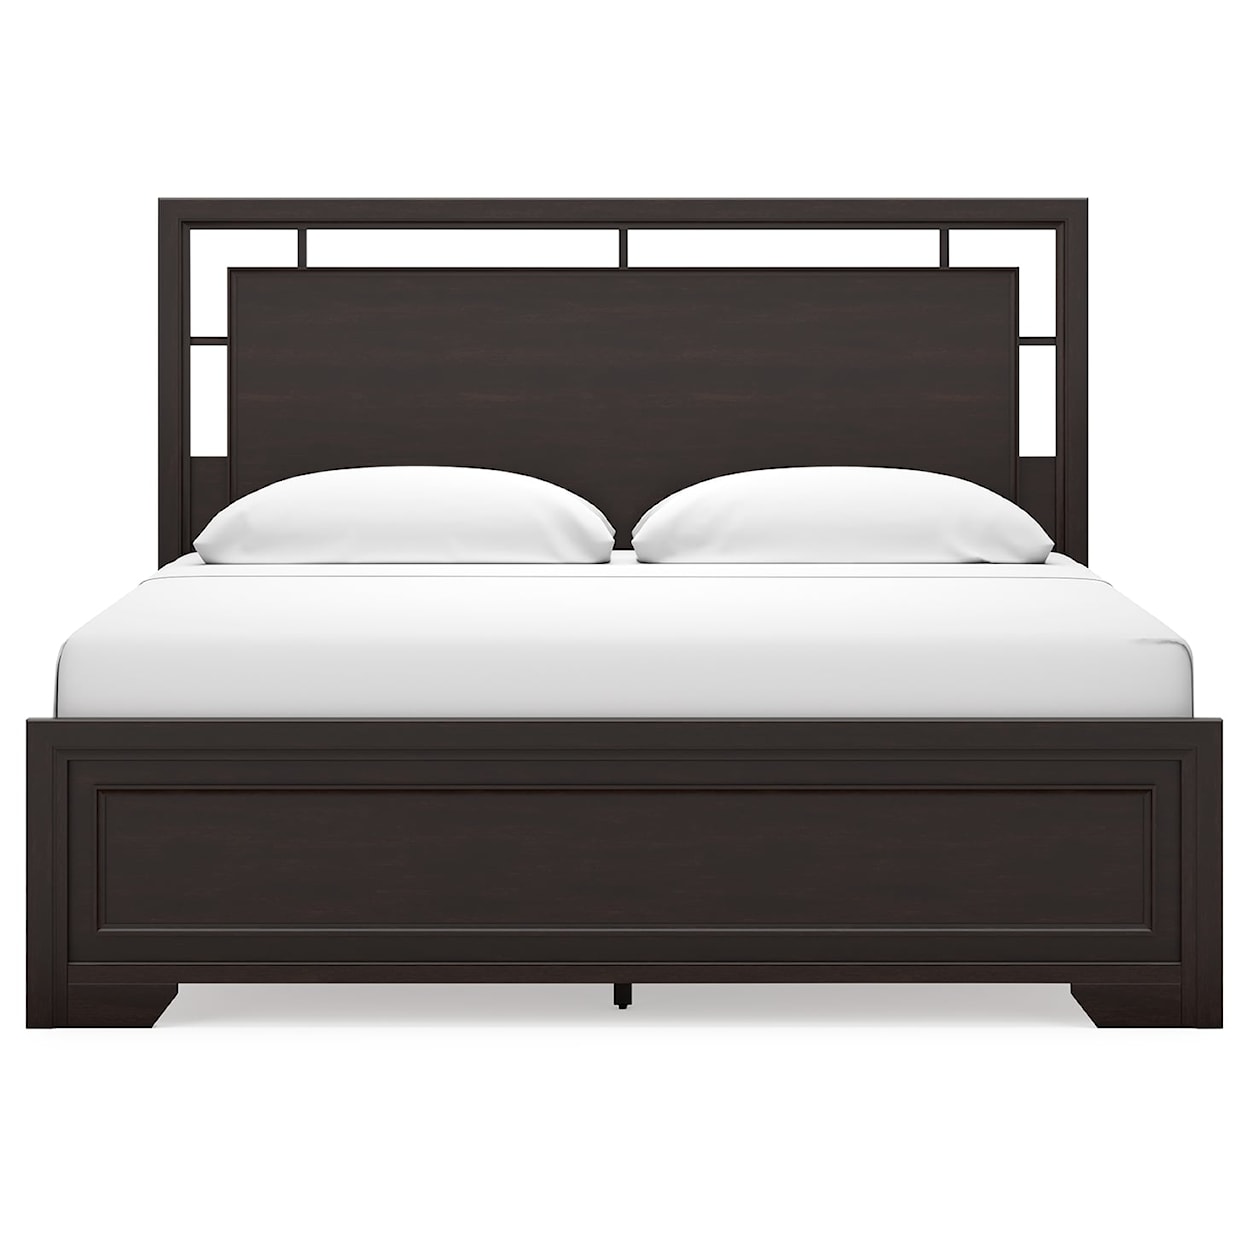 StyleLine Covetown King Panel Bed